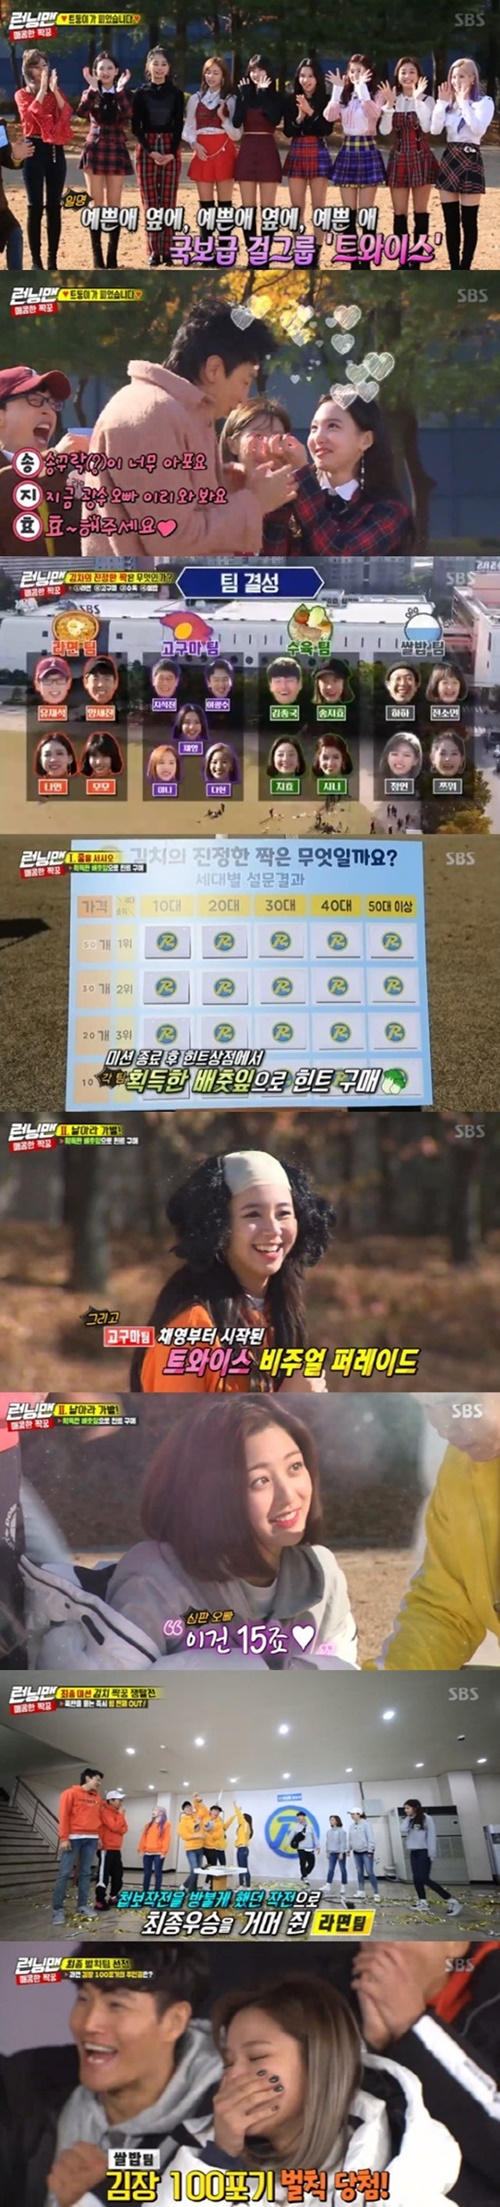 <p>Day 3 viewership survey Agency Nielsen Korea, according to the last 2 days broadcast SBS ‘Running Man’is the main advertising officials of the important indicators here are age 20-49 years (‘2049’) target audience 4. 5%(NCR, furniture, Part 2 viewership standard)record for the same time period, 1 ranked. Average viewership is part 1 of 5. 3%, Part 2 7. 7%(the NCR furniture viewership standards)was, per minute, with a maximum application rate of 8. Up to 8% jumped.</p><p>The kimchis true mate, find Kim most distinctive ‘spicy paired peek-a-Boo’ lace decorated in the ‘Running Man’ sister group TWICE home and by members of the acclaimed shorter. This race is a team competition with a as long as Instant noodle team Yoo Jae-Suk, Yang and more as well, Momo, I smoke, and every team in the Suk Jin, Lee Kwang-soo, Chae, Mina, Implementation, Training, Team Kim Jong Kook, Song JI Hyo,, Hyo, Rice team in that one, small, square, Richardson sub divided into.</p><p>Each team has a ‘line’ through the game fierce confrontation unfolded, Instant noodle team, the academic team, and each team, each 1 win by handing out the hints acquired, and Round 2 of the ‘fly! The wig-switching in the potato team and Instant noodle team # 1, # 2, or once the hint is acquired.</p><p>The last final round that the menu is attached to the name tag off of the menu when you exchange, while a bomb attached to the name tags off team the power is out, and the menu until the opponent beyond the ‘Star race’began. Ago min is Lee Kwang-soos name tag off, but Lee Kwang-soo is a bomb, this Rice team is the power being out face. Water and water our father, and our exchange rate on the Instant noodle team info to start up, expand, and ‘kimchis true even’exclaim the headquarters seat and headed towards, training, team support available is Instant noodle team or the name of the tag to off when you want to or “Instant noodle”, and shout victory.</p>